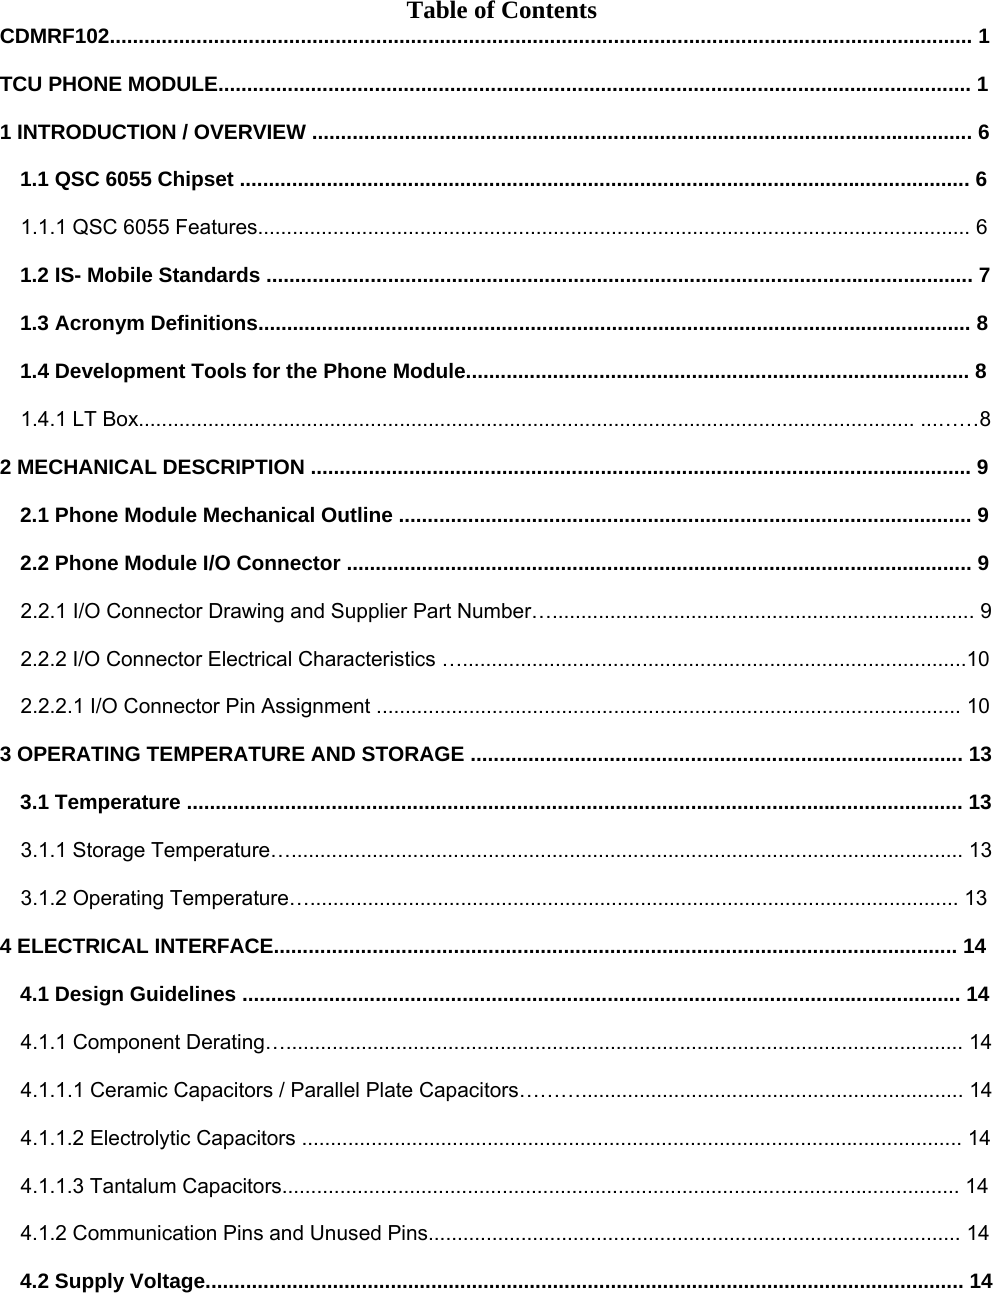 Table of Contents CDMRF102..................................................................................................................................................... 1  TCU PHONE MODULE.................................................................................................................................. 1  1 INTRODUCTION / OVERVIEW .................................................................................................................. 6  1.1 QSC 6055 Chipset .............................................................................................................................. 6  1.1.1 QSC 6055 Features........................................................................................................................... 6  1.2 IS- Mobile Standards .......................................................................................................................... 7  1.3 Acronym Definitions........................................................................................................................... 8  1.4 Development Tools for the Phone Module....................................................................................... 8  1.4.1 LT Box...................................................................................................................................... ...……8  2 MECHANICAL DESCRIPTION .................................................................................................................. 9  2.1 Phone Module Mechanical Outline ................................................................................................... 9  2.2 Phone Module I/O Connector ............................................................................................................ 9  2.2.1 I/O Connector Drawing and Supplier Part Number…......................................................................... 9  2.2.2 I/O Connector Electrical Characteristics ….......................................................................................10  2.2.2.1 I/O Connector Pin Assignment ..................................................................................................... 10  3 OPERATING TEMPERATURE AND STORAGE ..................................................................................... 13  3.1 Temperature ...................................................................................................................................... 13  3.1.1 Storage Temperature….................................................................................................................... 13  3.1.2 Operating Temperature…................................................................................................................ 13  4 ELECTRICAL INTERFACE...................................................................................................................... 14  4.1 Design Guidelines ............................................................................................................................ 14  4.1.1 Component Derating…..................................................................................................................... 14  4.1.1.1 Ceramic Capacitors / Parallel Plate Capacitors……….................................................................. 14  4.1.1.2 Electrolytic Capacitors .................................................................................................................. 14  4.1.1.3 Tantalum Capacitors..................................................................................................................... 14  4.1.2 Communication Pins and Unused Pins............................................................................................ 14  4.2 Supply Voltage................................................................................................................................... 14        